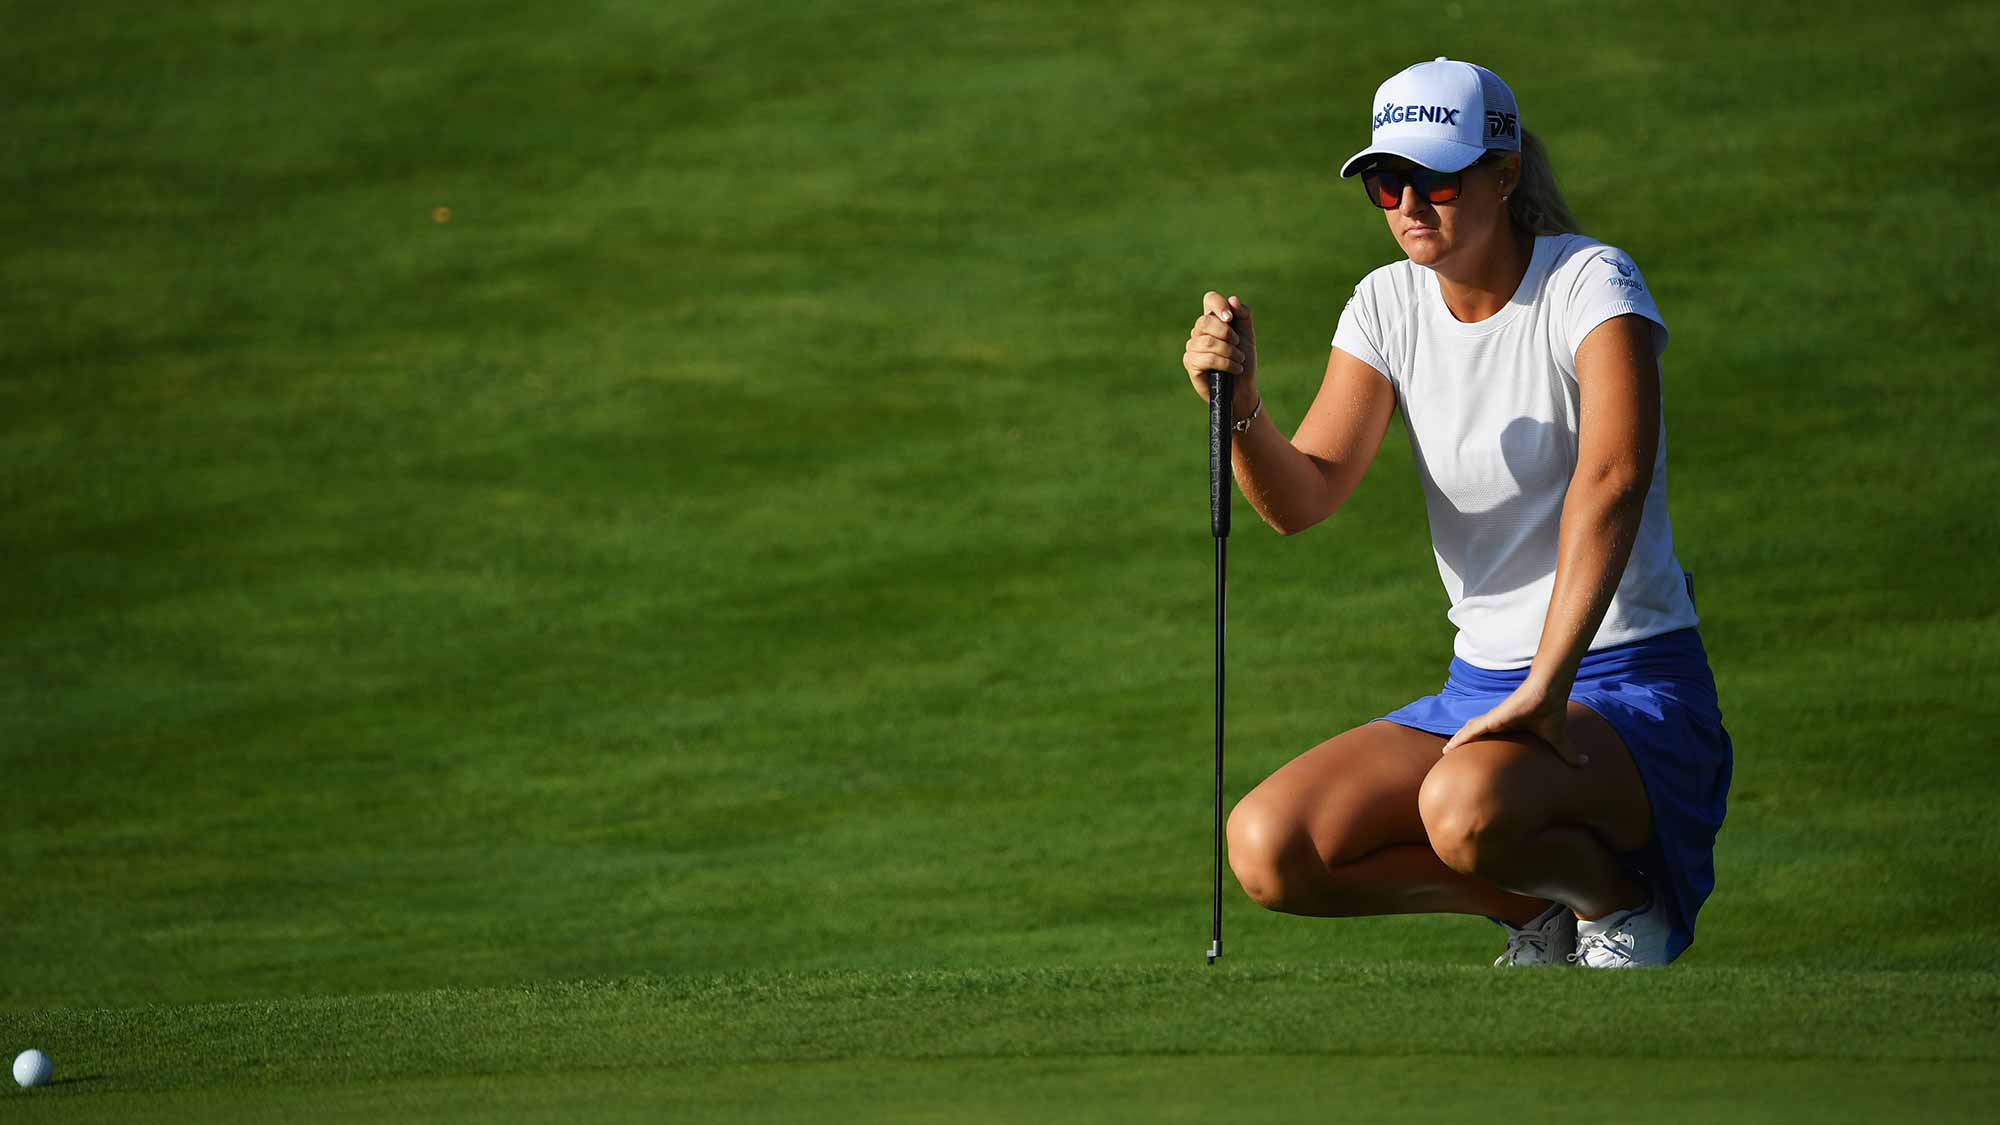 Anna Nordqvist of Sweden lines up a putt during day one of the Evian Championship at Evian Resort Golf Club on September 13, 2018 in Evian-les-Bains, France